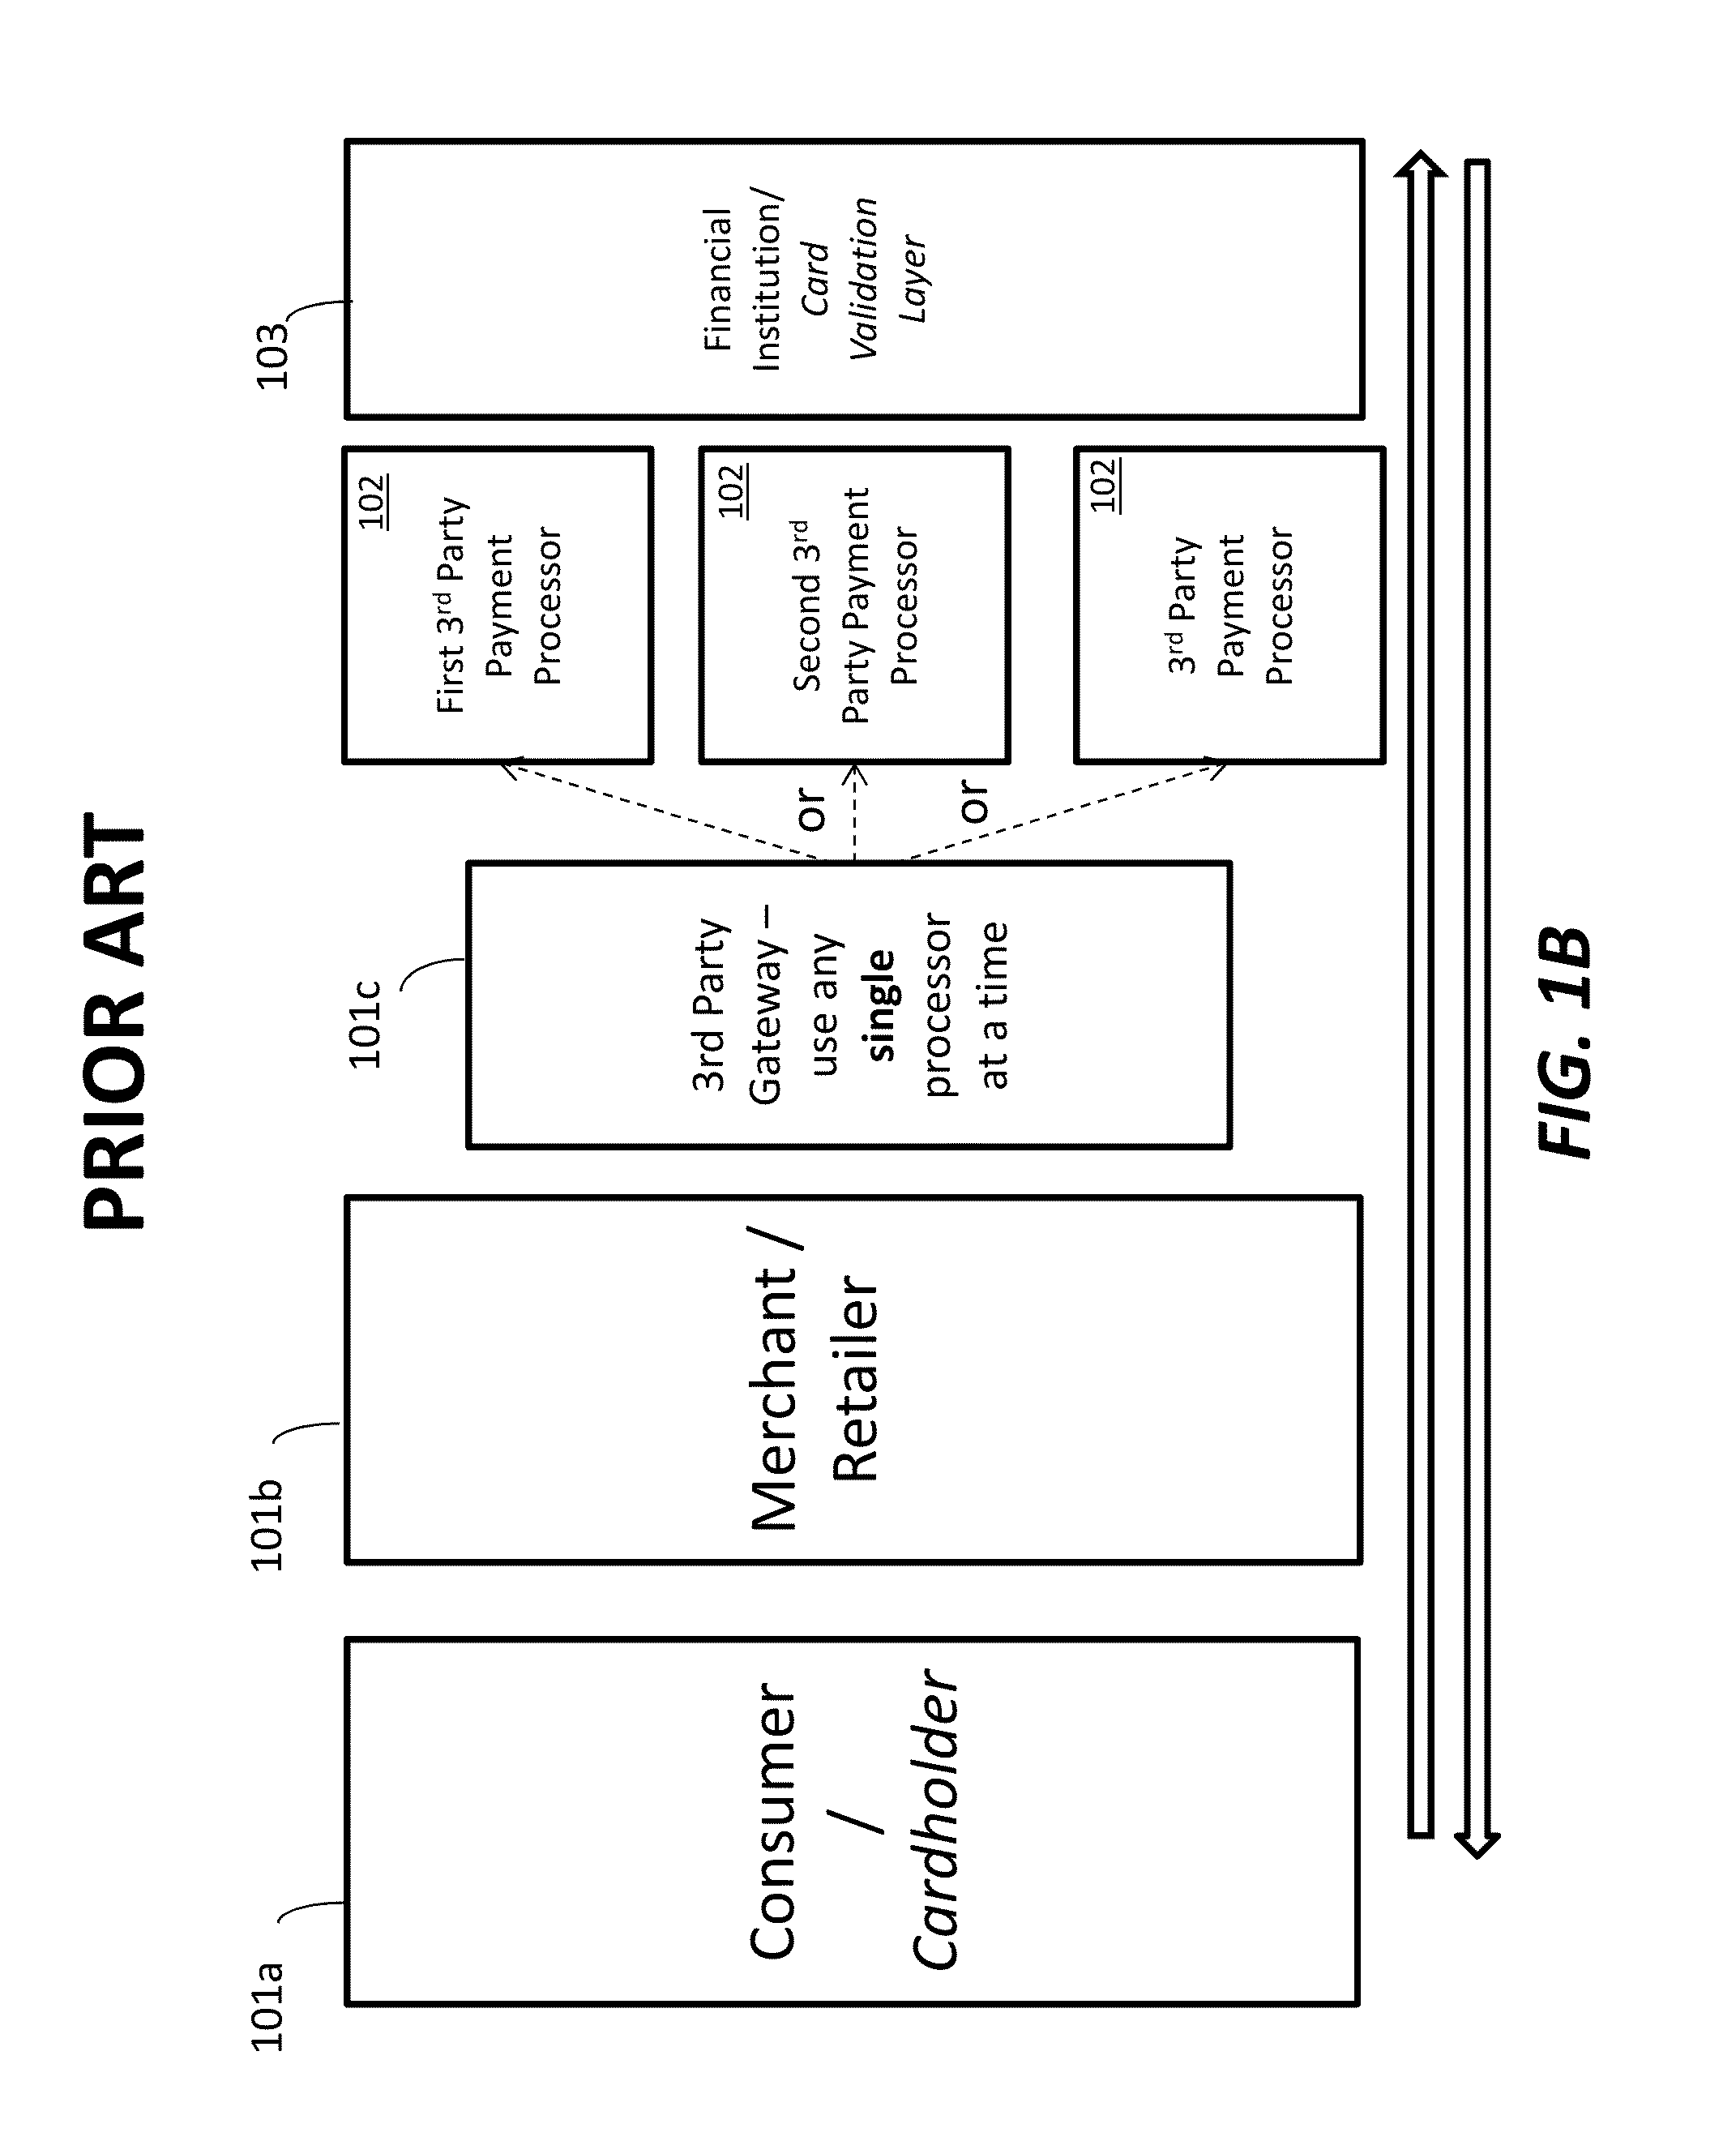 Dynamic payment processing gateway with rules based payment processing engine